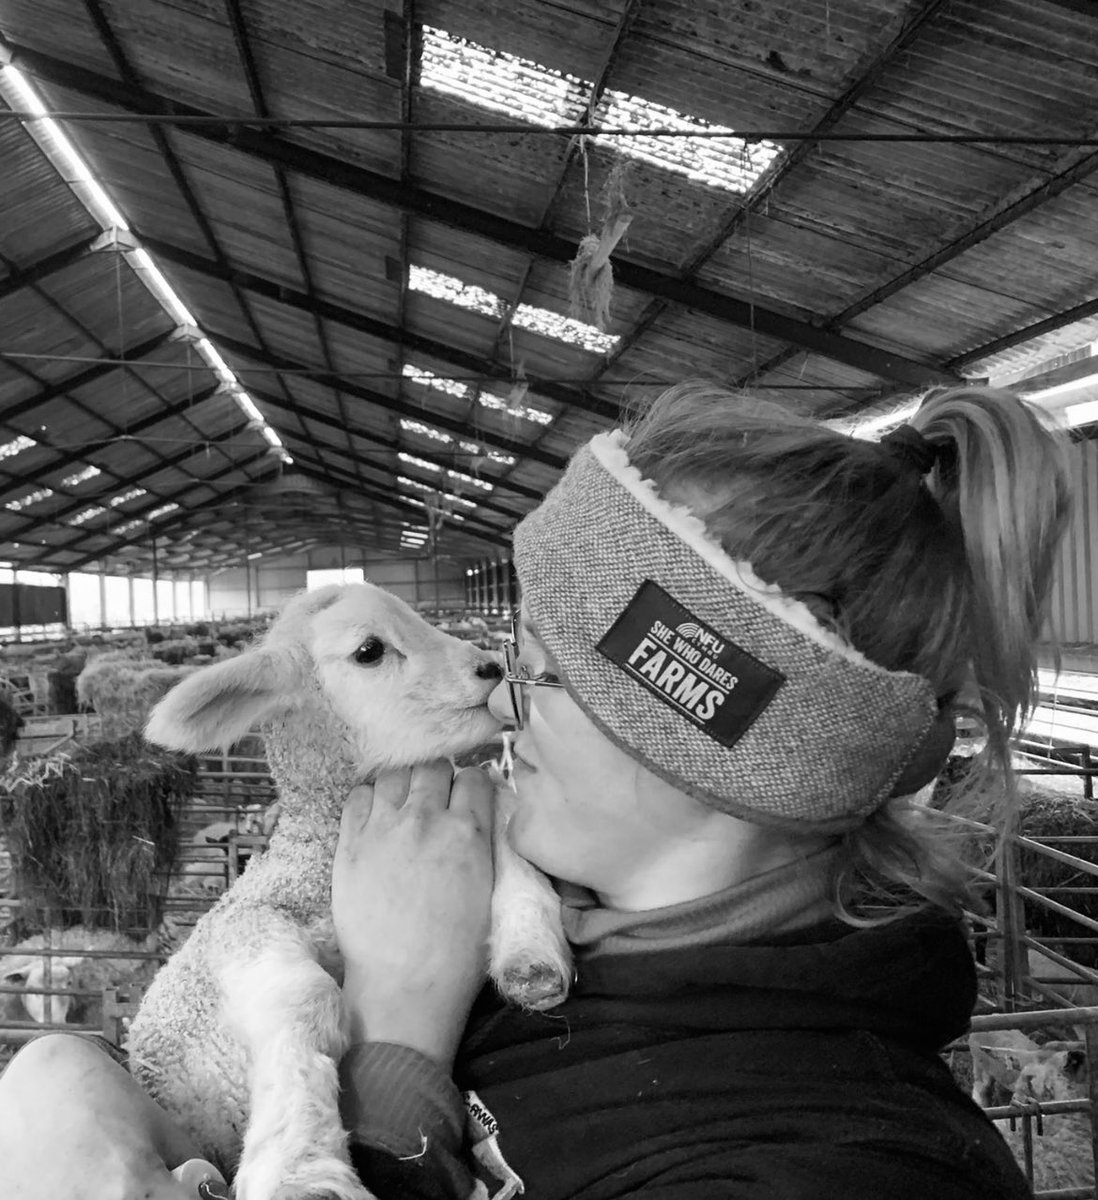 Nose kisses from lambs everyday please.  

#shewhodaresfarms